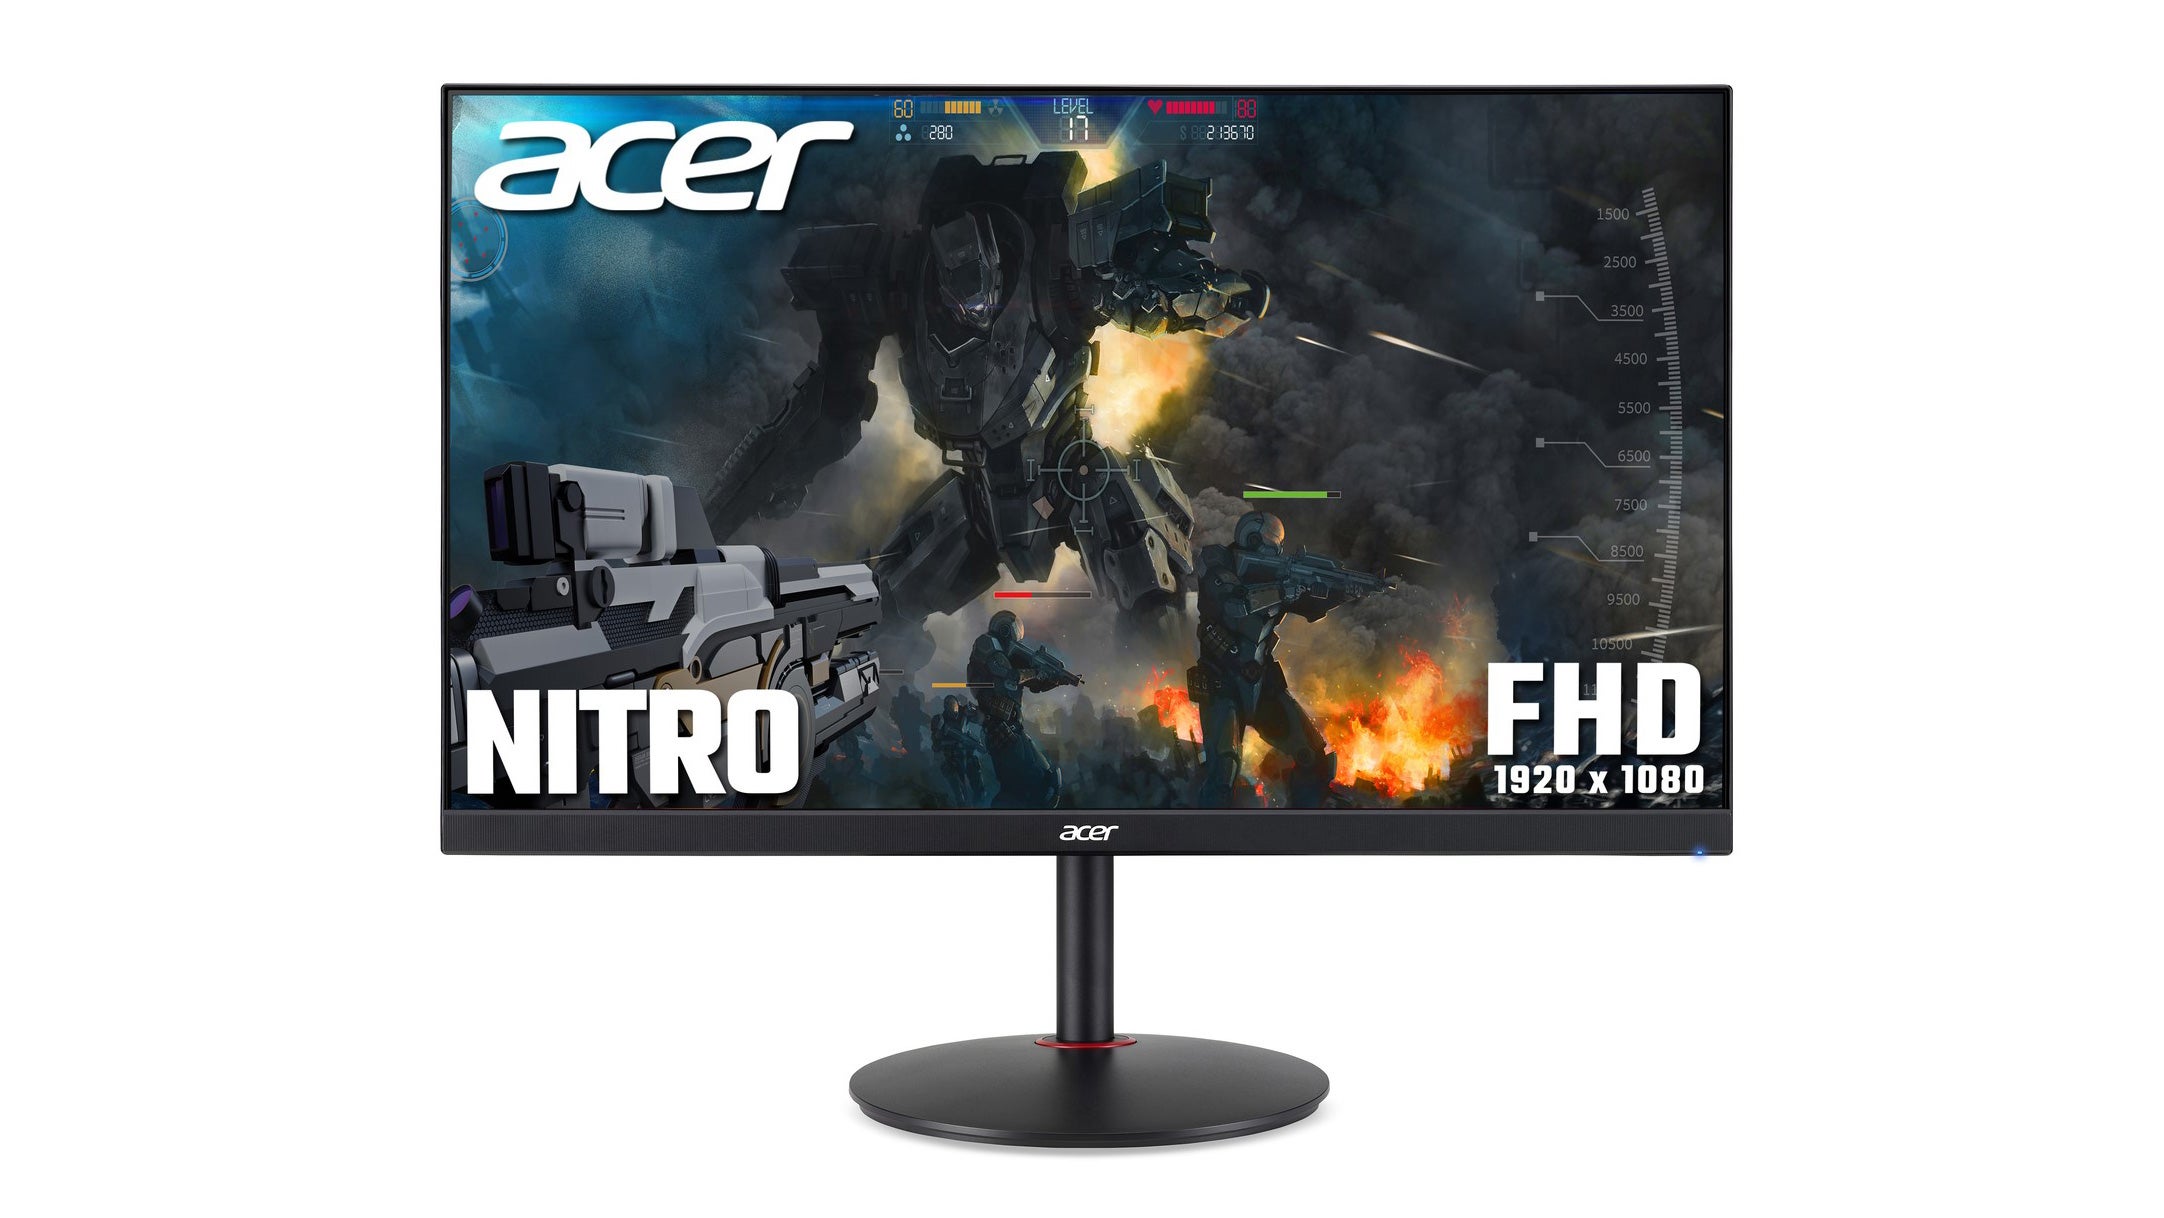 This 280Hz Acer Nitro monitor is down to £180 at Laptops Direct in 